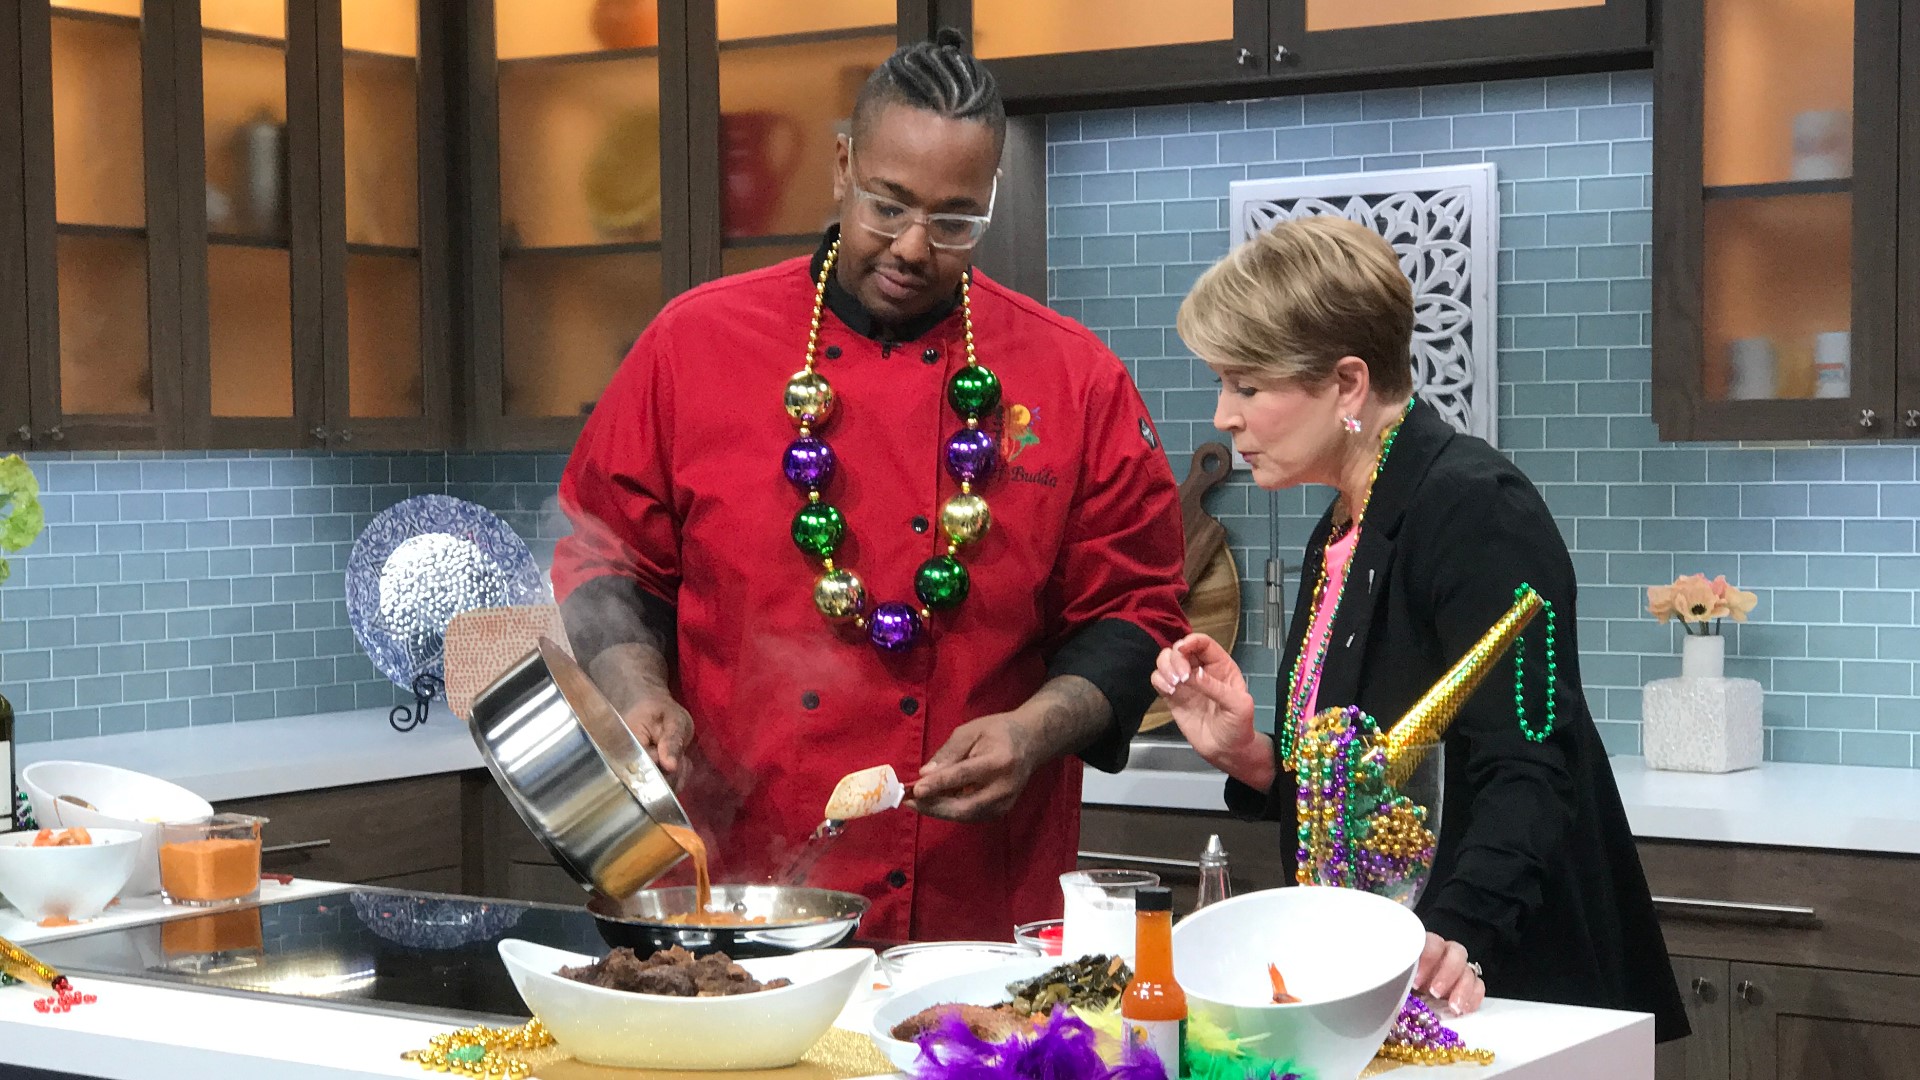 Chef Bryce "Buddah" Martin shows us how to eat our way through Mardi Gras with Crawfish Monica, Oxtail Stew, and of course ... a King Cake!